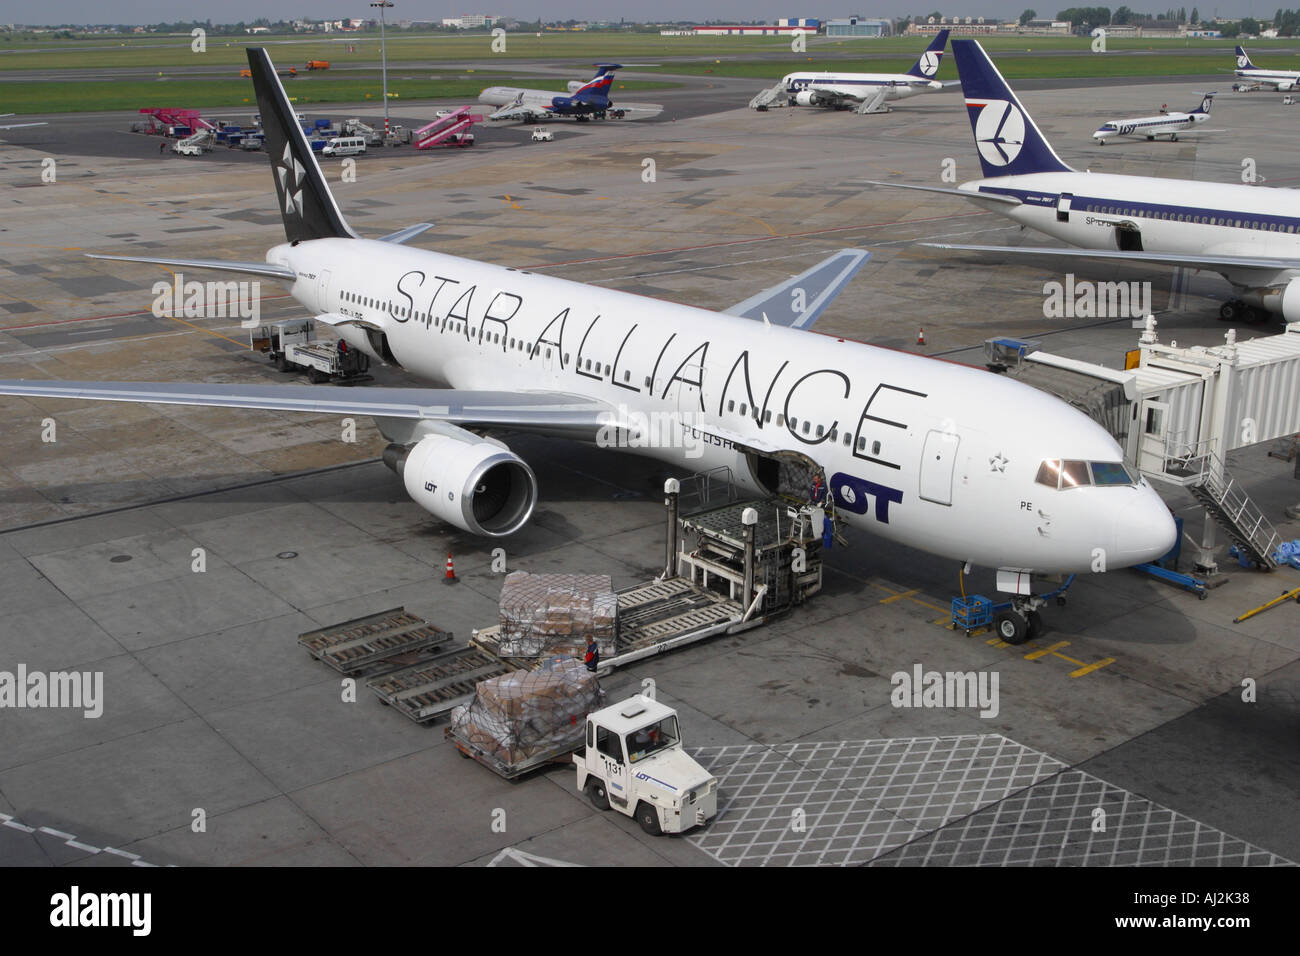 Star Alliance Boeing 767 operated by LOT Polish Airlines at Warsaw busy airport apron scene Poland Stock Photo